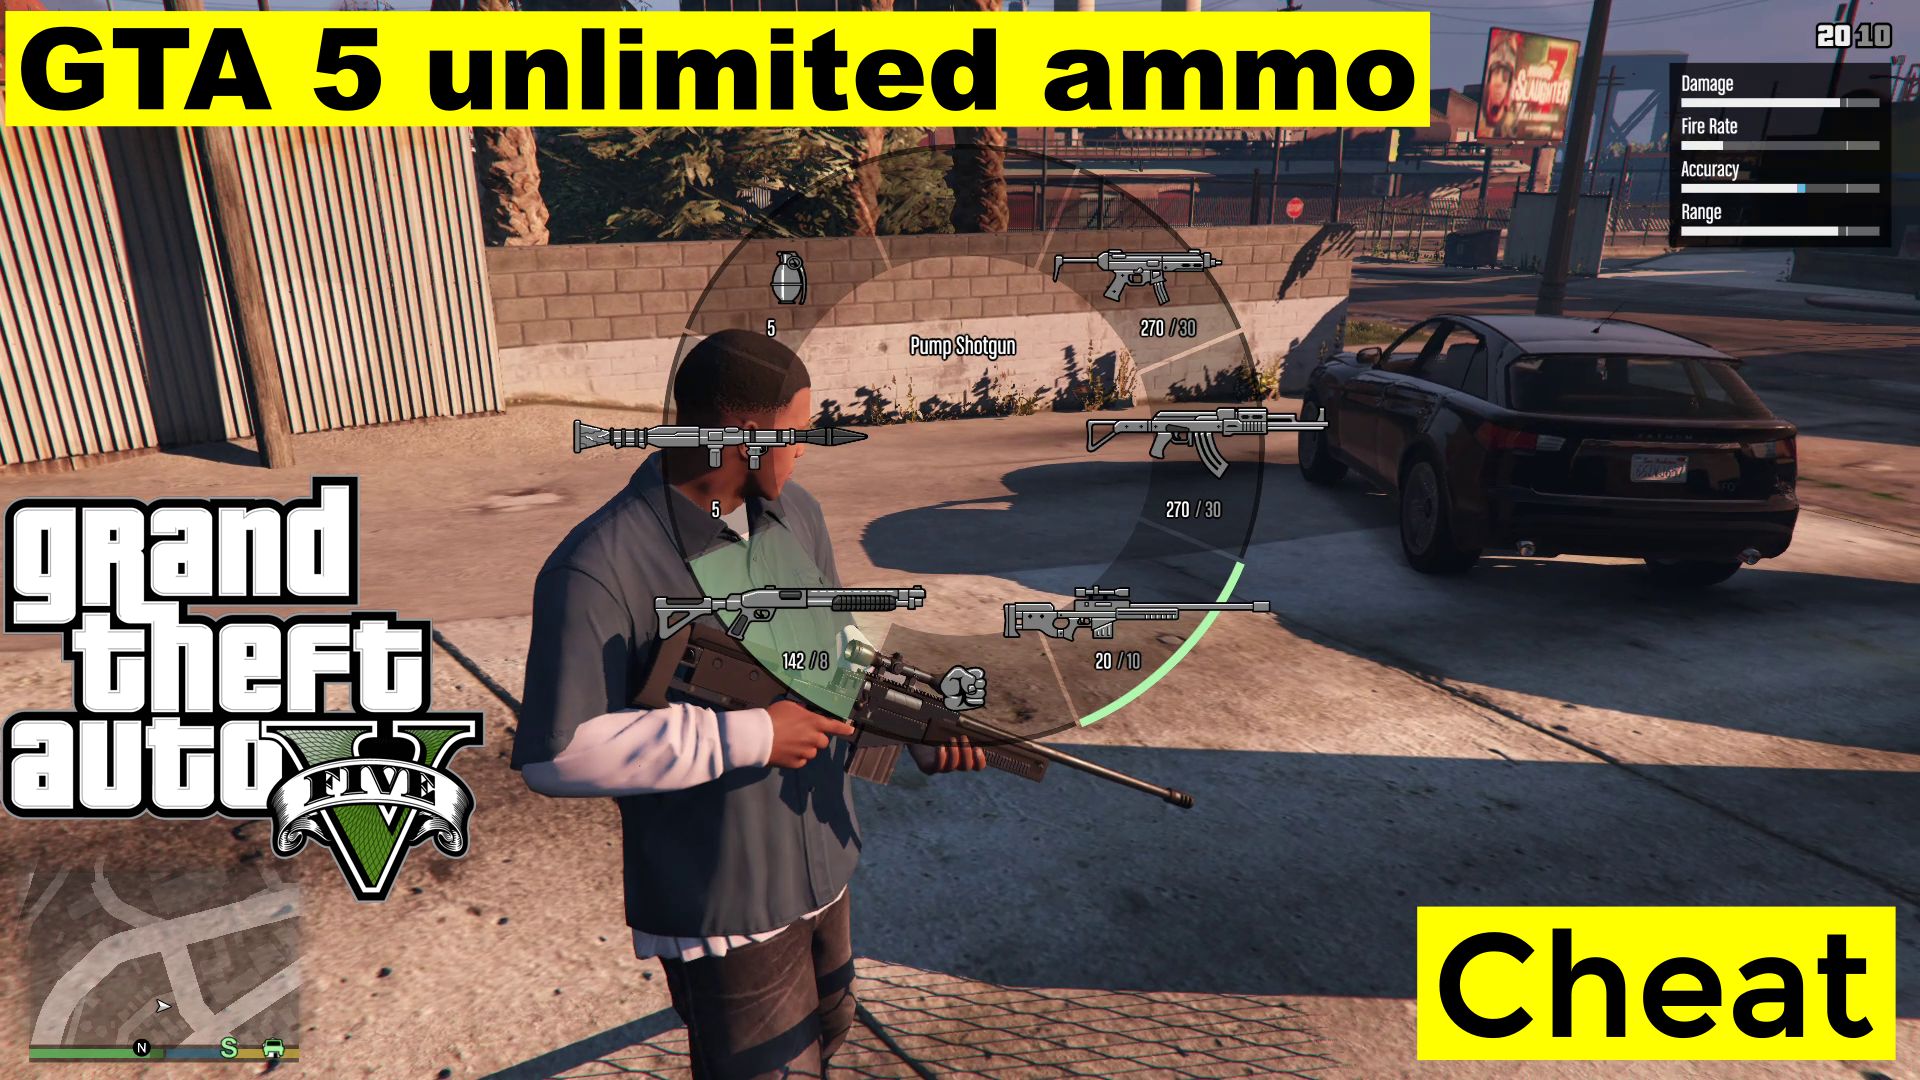 GTA 5 Ammo Illimited Math pour PC, Xbox, Playstation